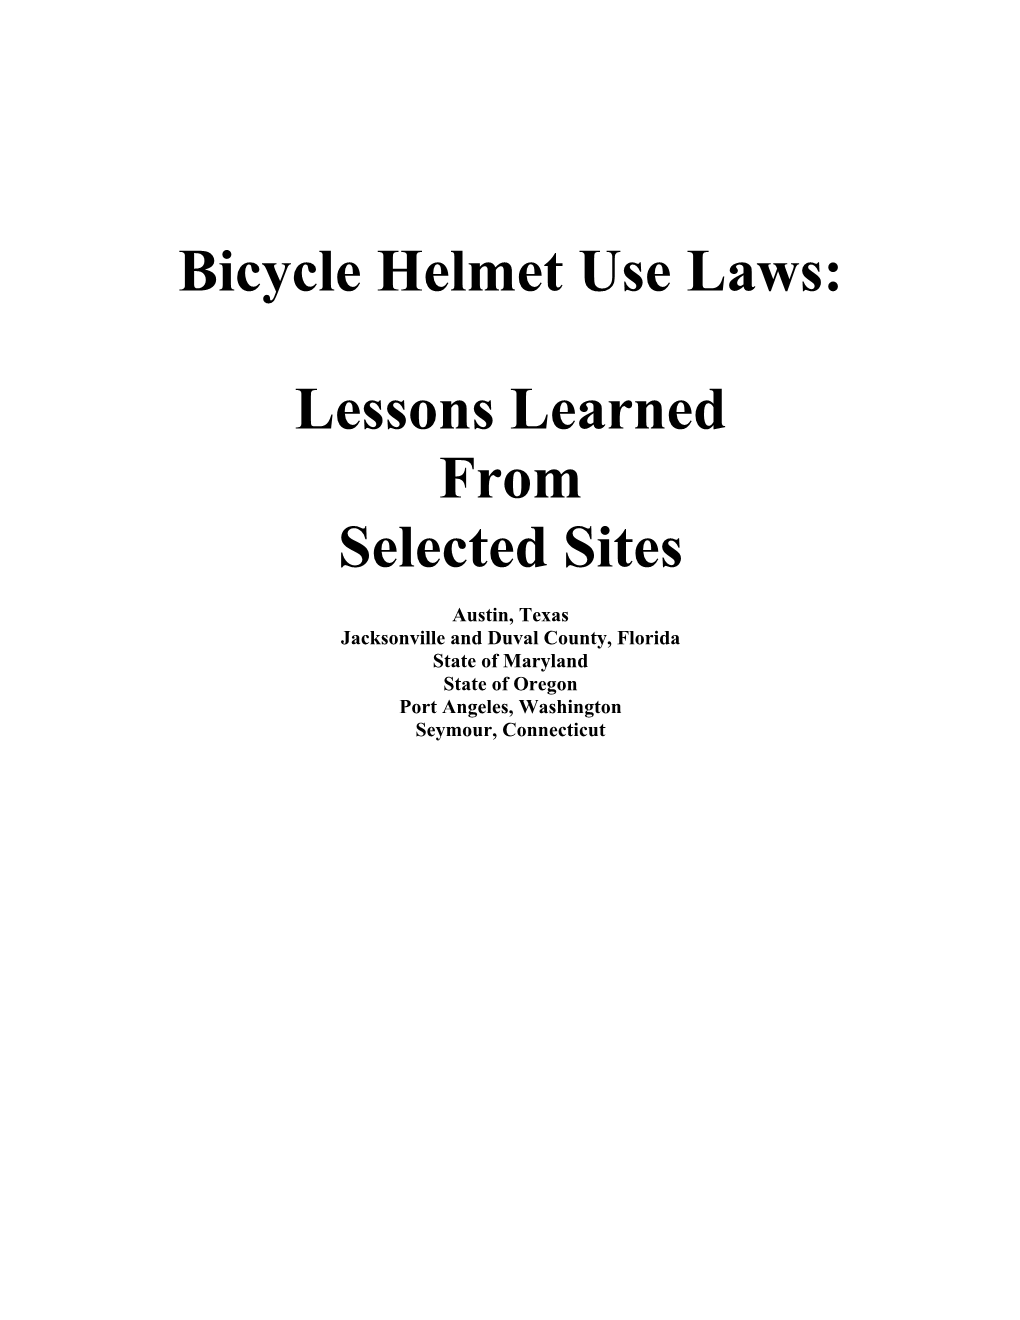 Bicycle Helmet Use Laws: Lessons Learned from Selected Sites